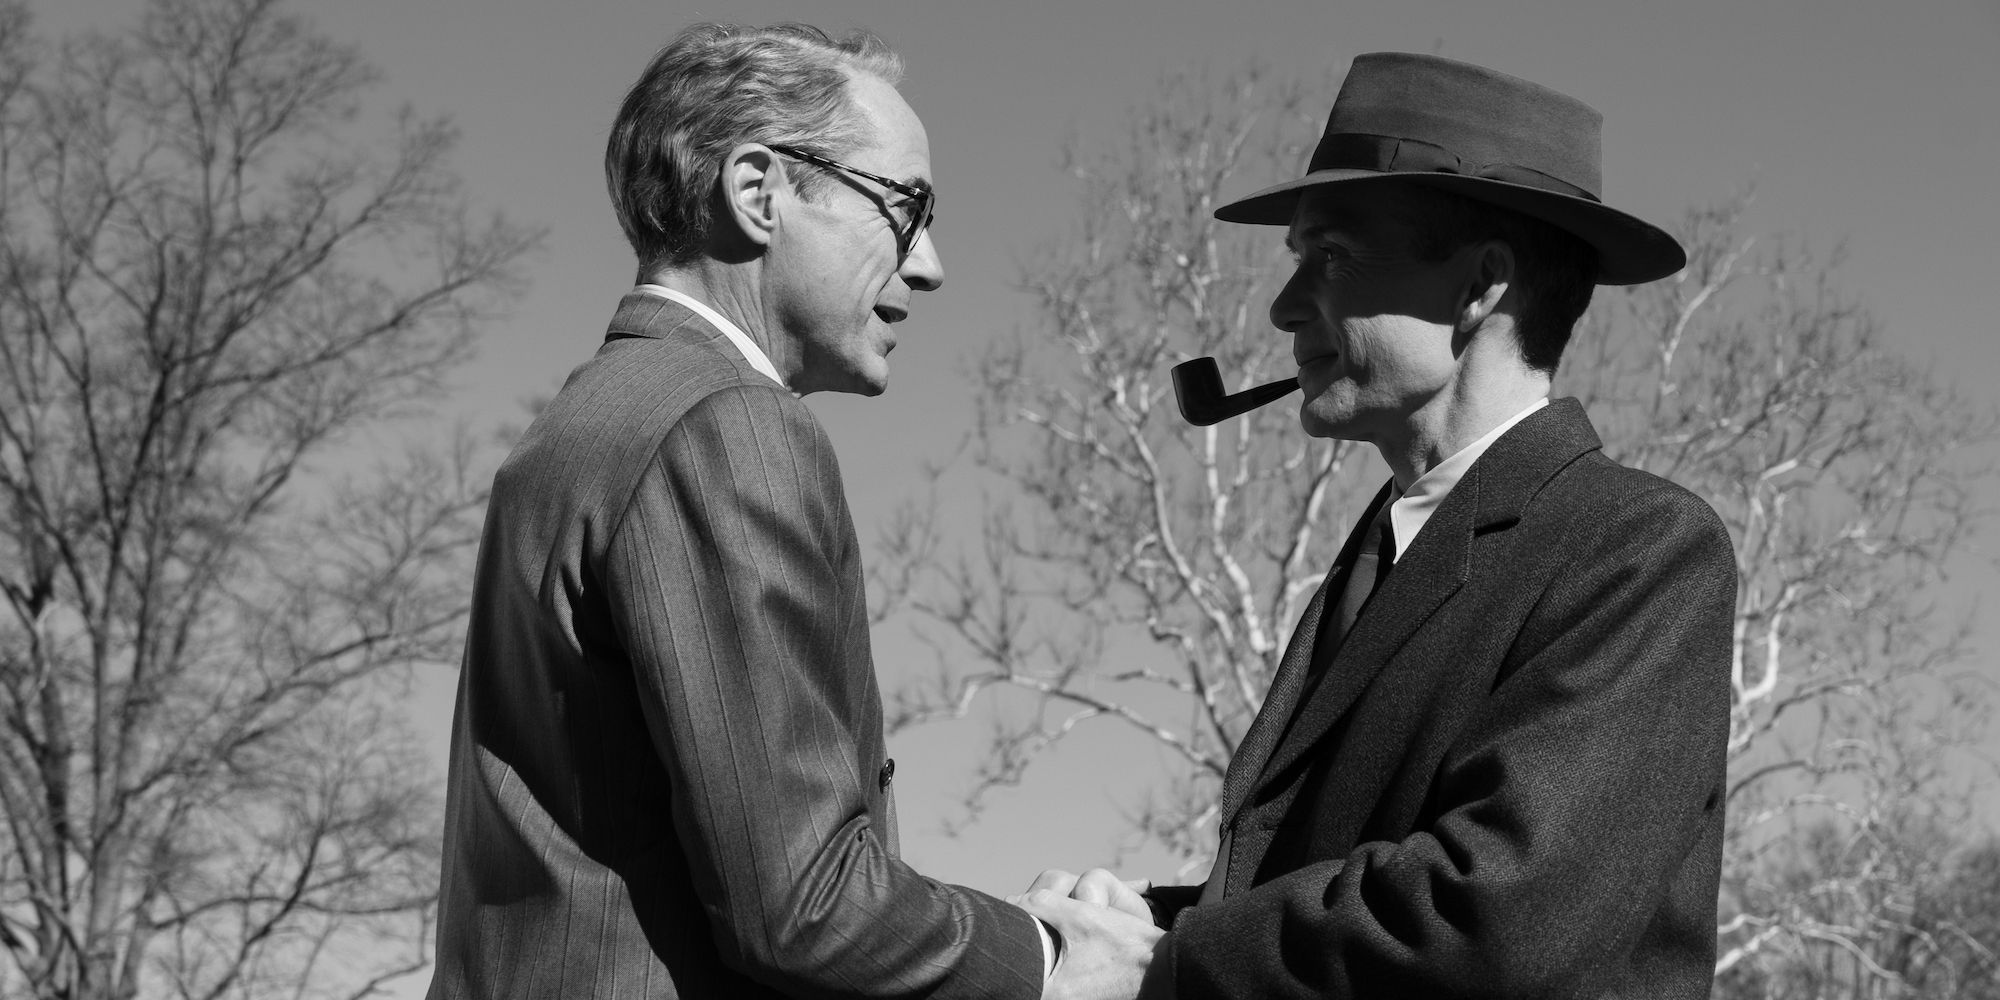 A black and white image of Oppenheimer meeting Strauss in the biopic movie